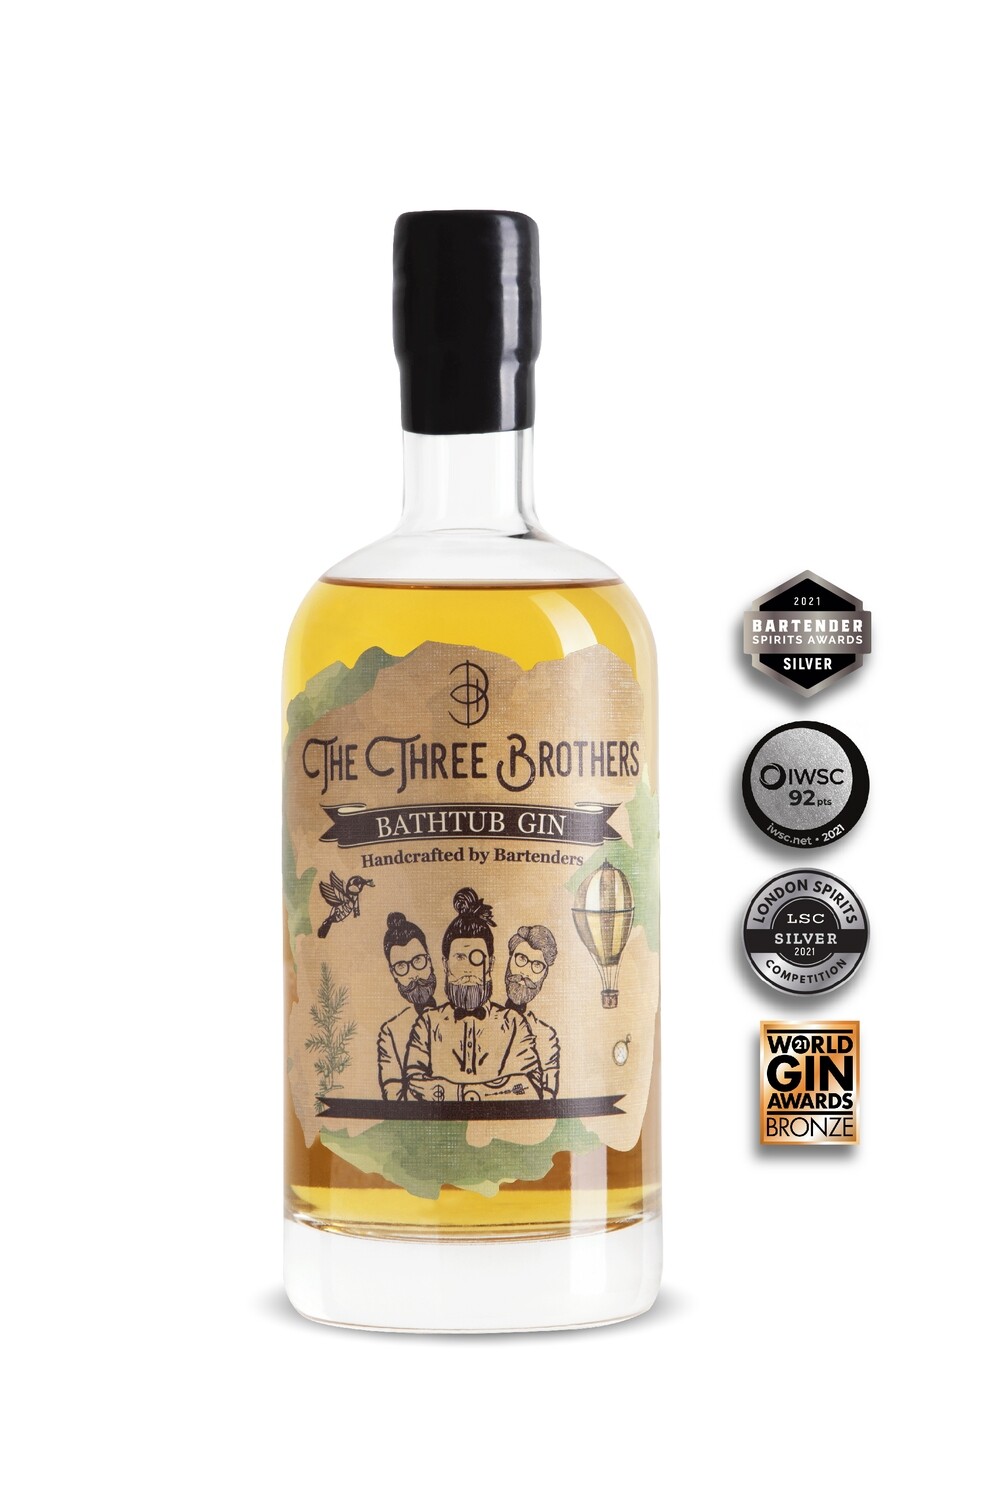 The Three Brothers Bathtub Gin – Store – Libons – Specialiteiten Libanon